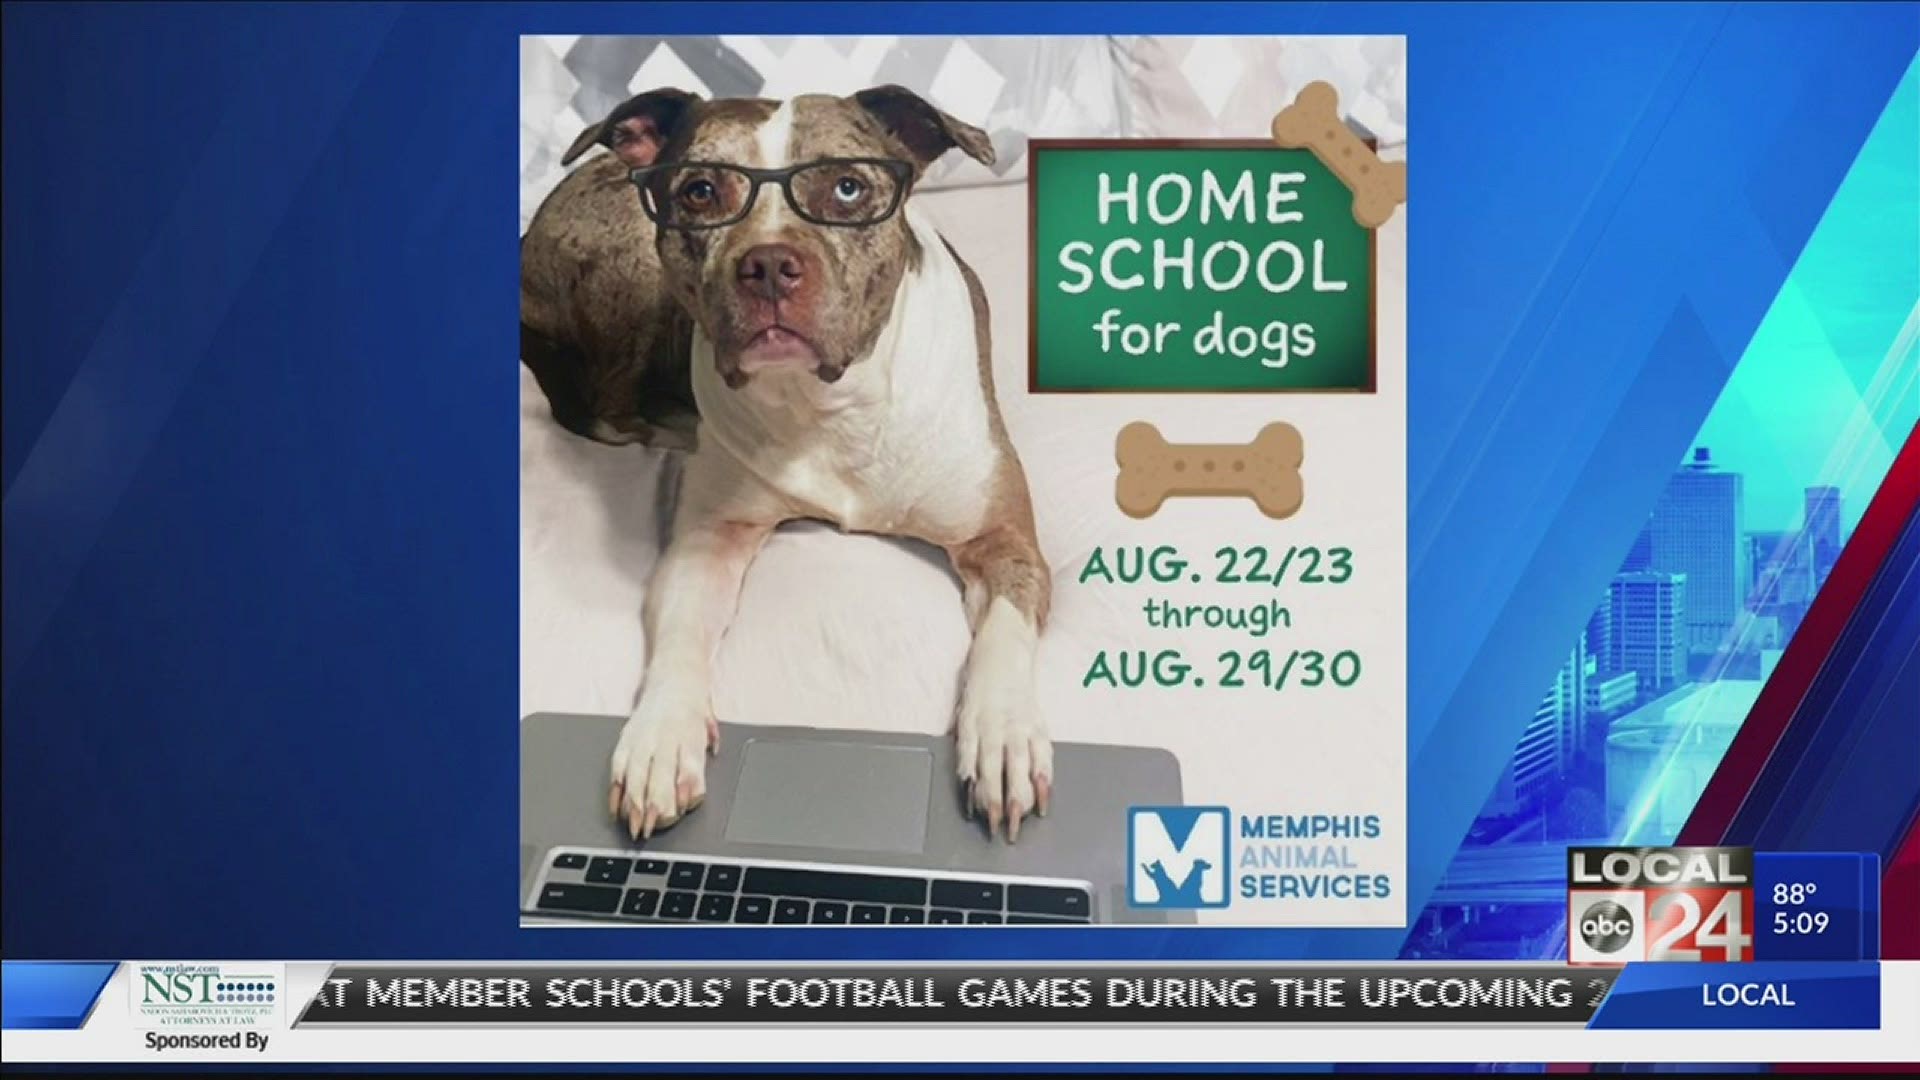 MAS is looking for families who can take in a shelter dog for a week to help them socialize.